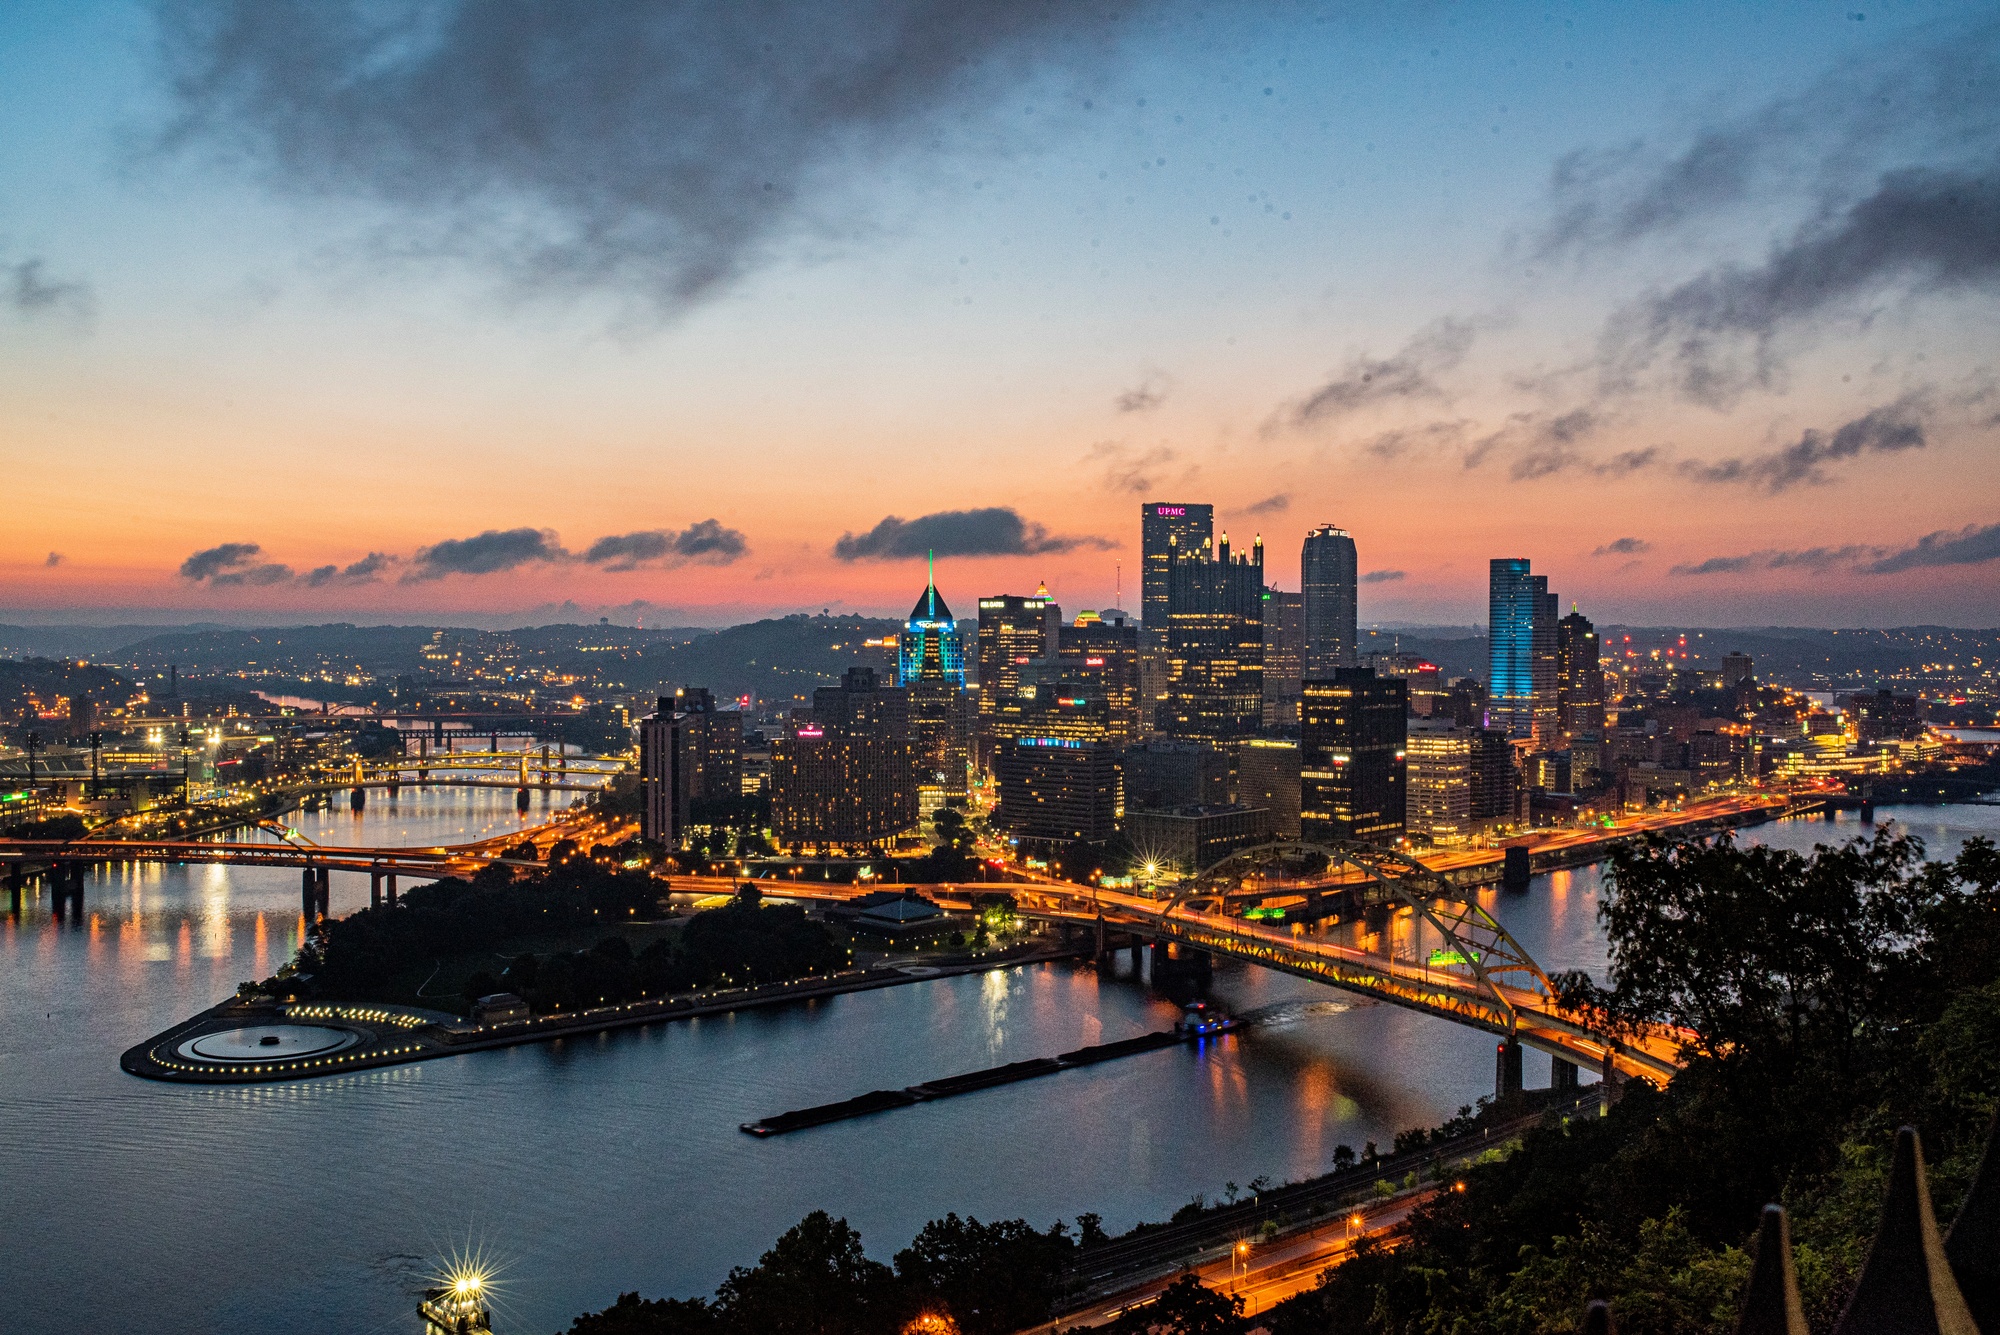 DVIDS - Images - Pittsburgh, Pennsylvania [Image 8 of 11]